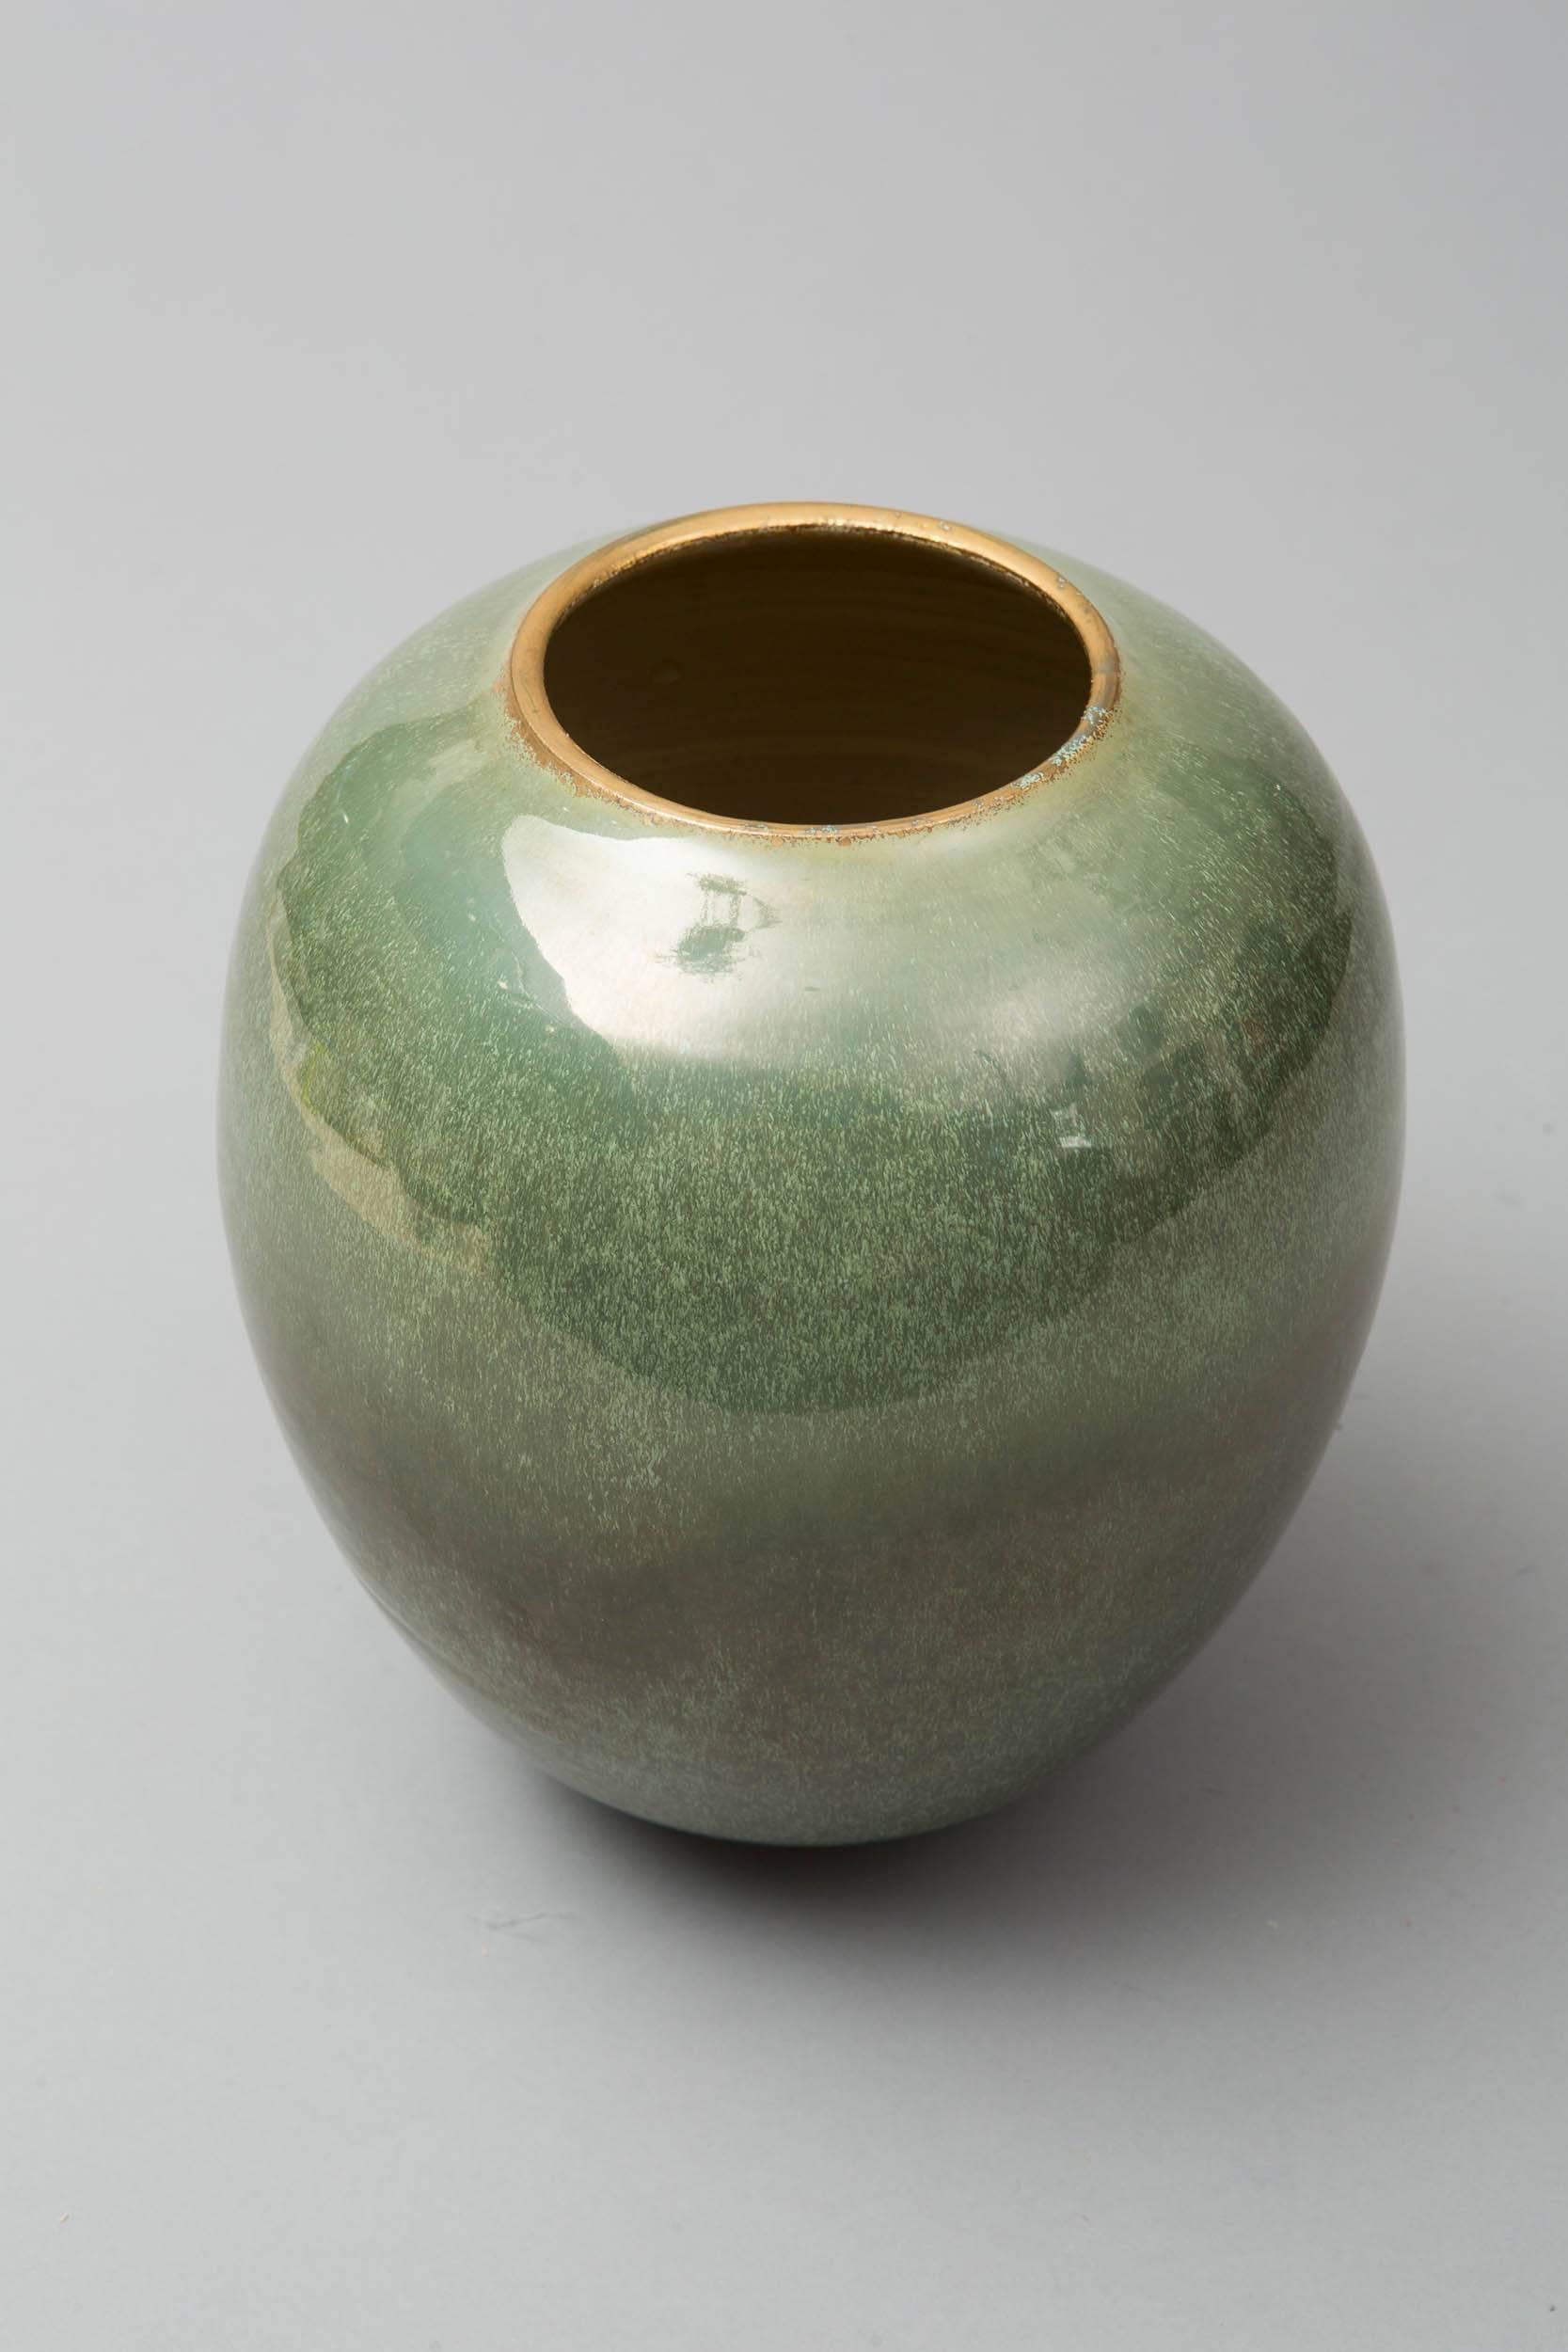 Wheel thrown white stoneware vase. 
Green celadon.
Glazed and gilted. 
One of a kind signed on the bottom. 
